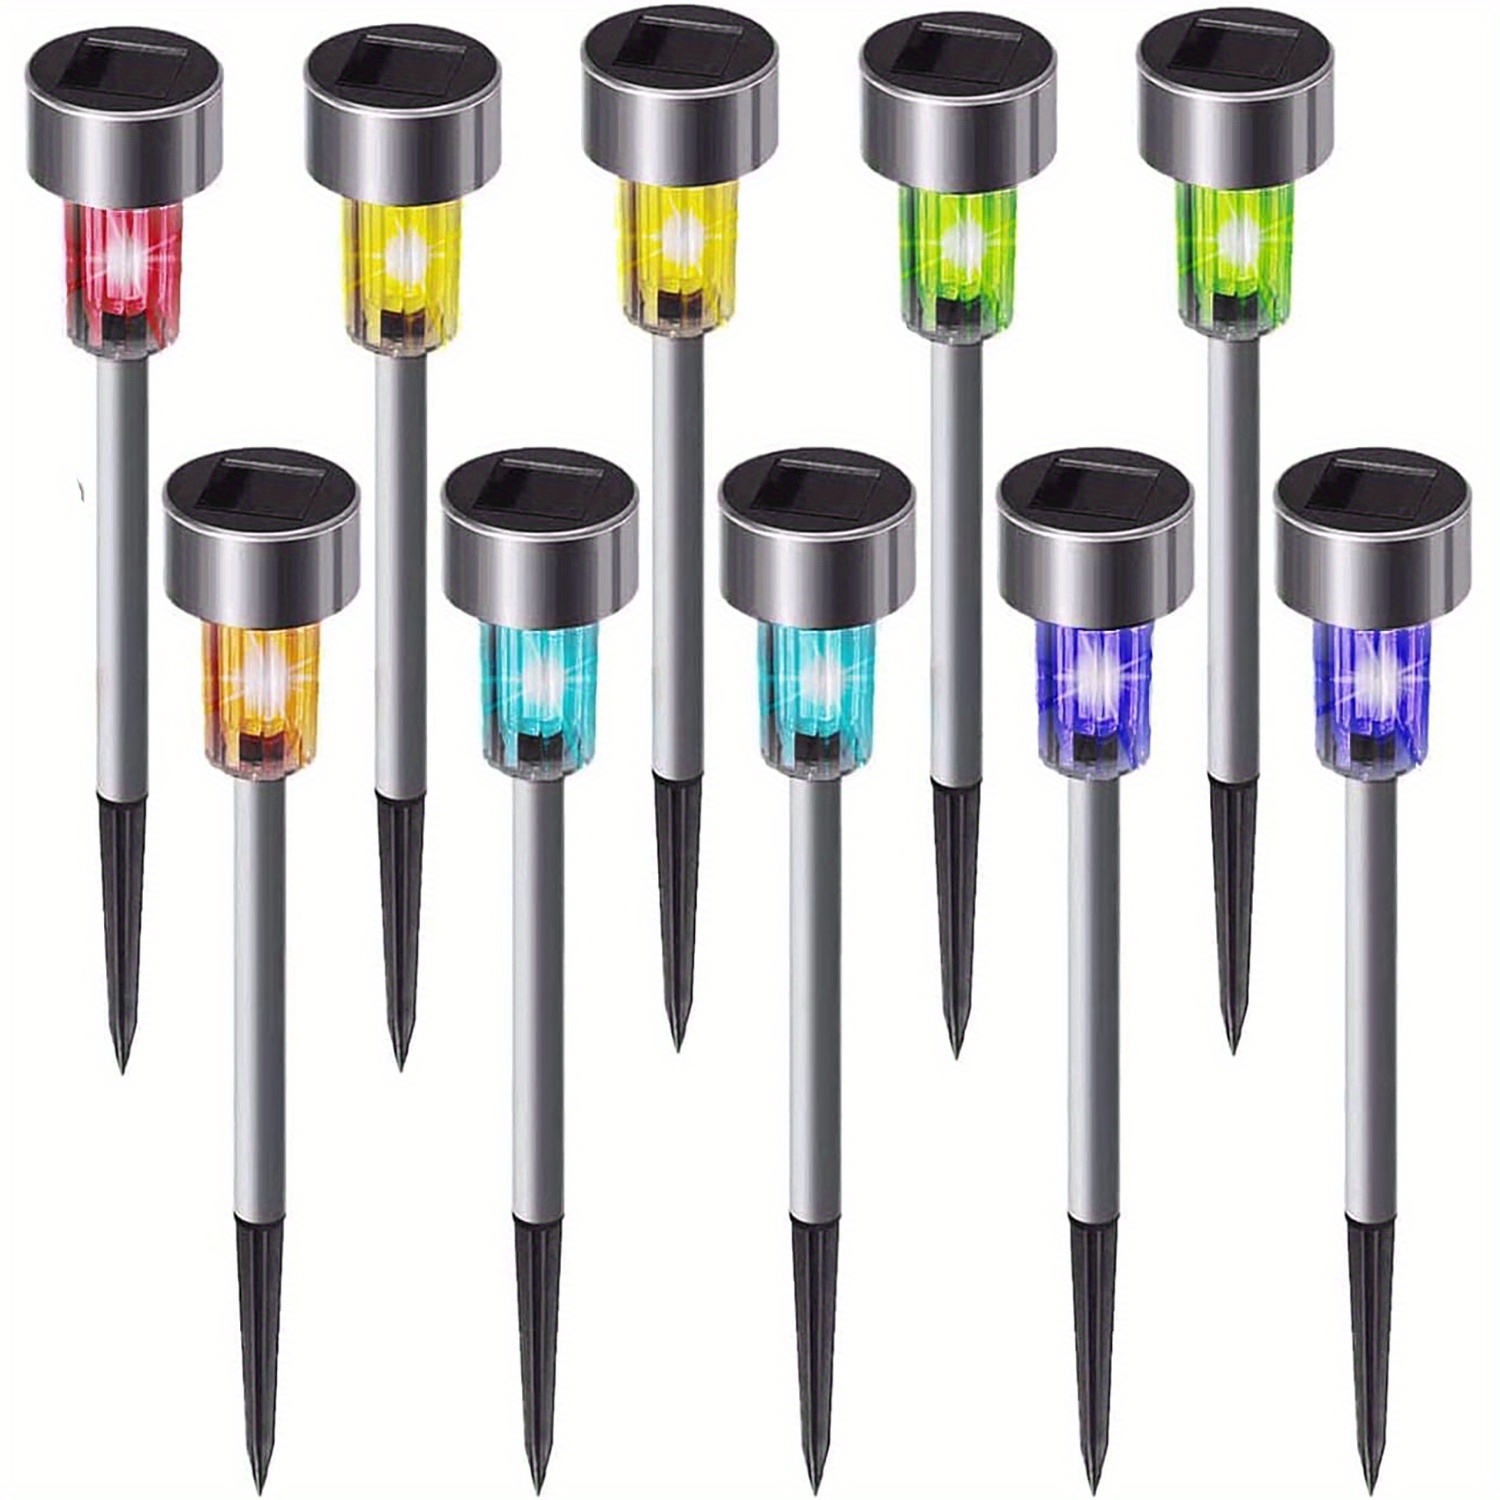 

20 Pack Solar Lights Outdoor Waterproof, Stainless Steel Led Landscape Lighting Outdoor Solar Lights For Outside For Pathway, Walkway, Patio, Yard, Lawn